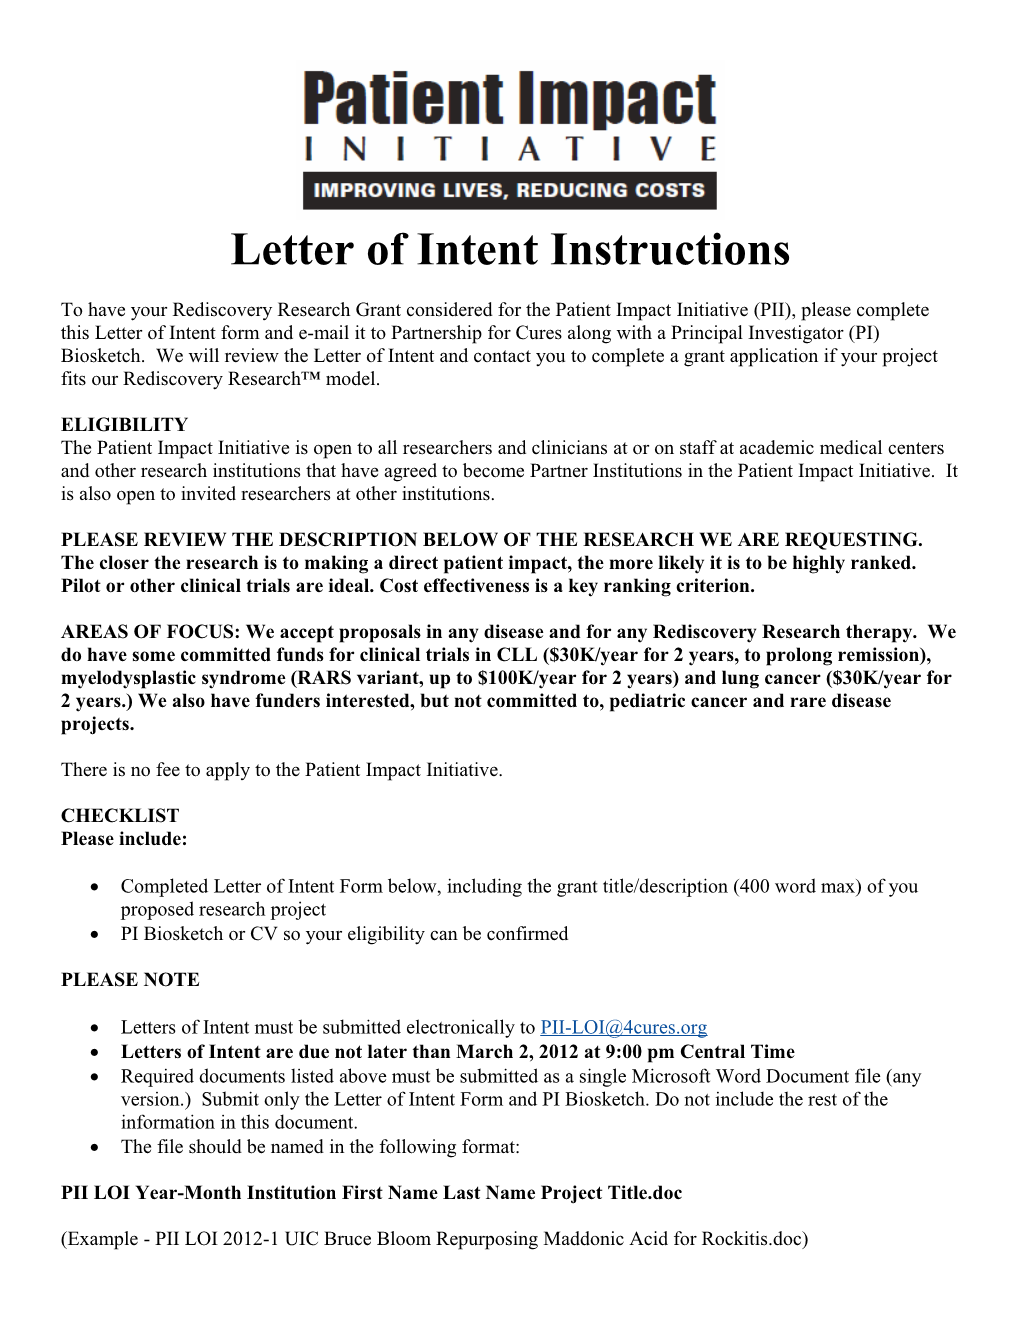 Letter of Intent Instructions